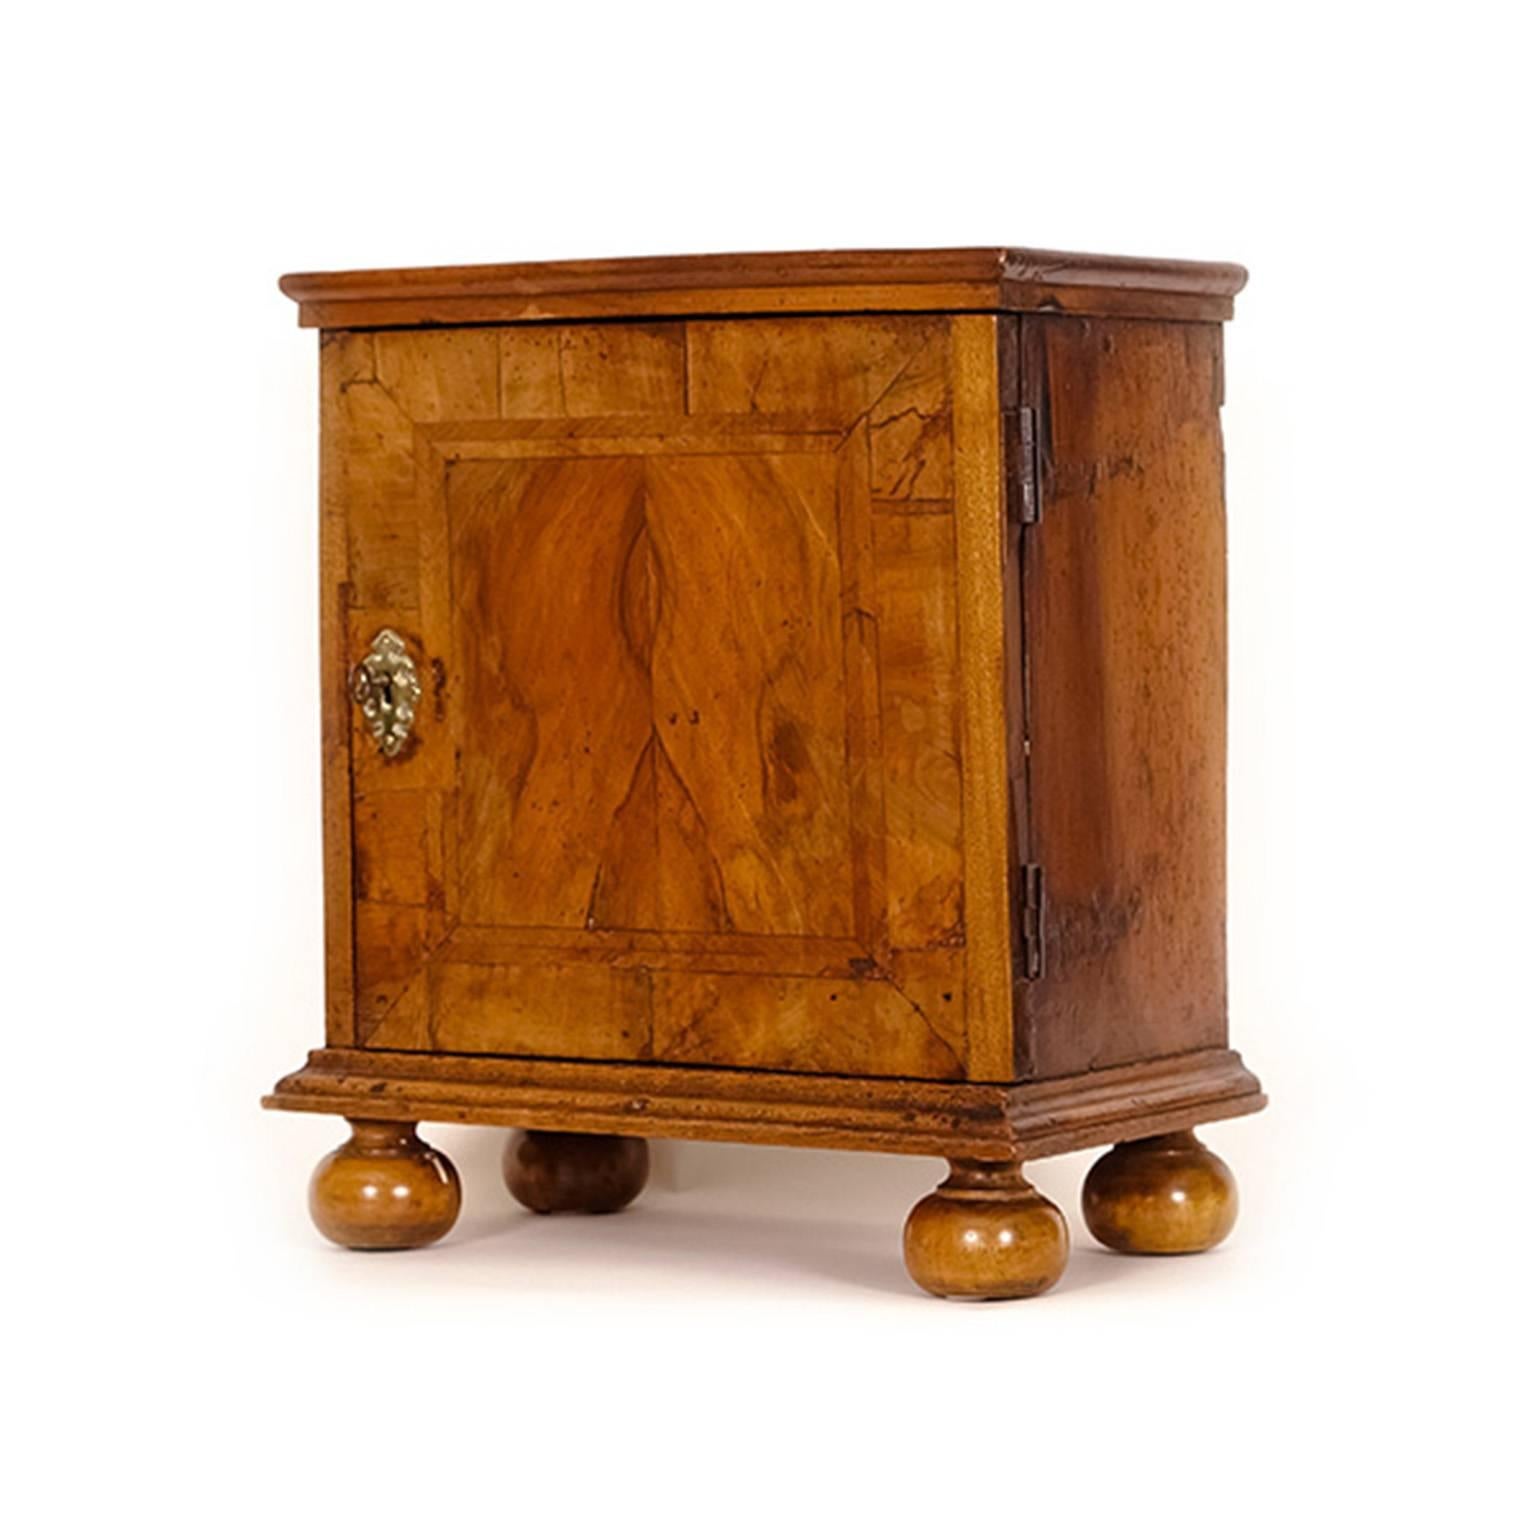 The door, inlaid with feather banding in a cross-banded border, opens to reveal a fitted interior of small drawers with brass drop handles and molding to the divides. Stands on a molded base with bun feet.